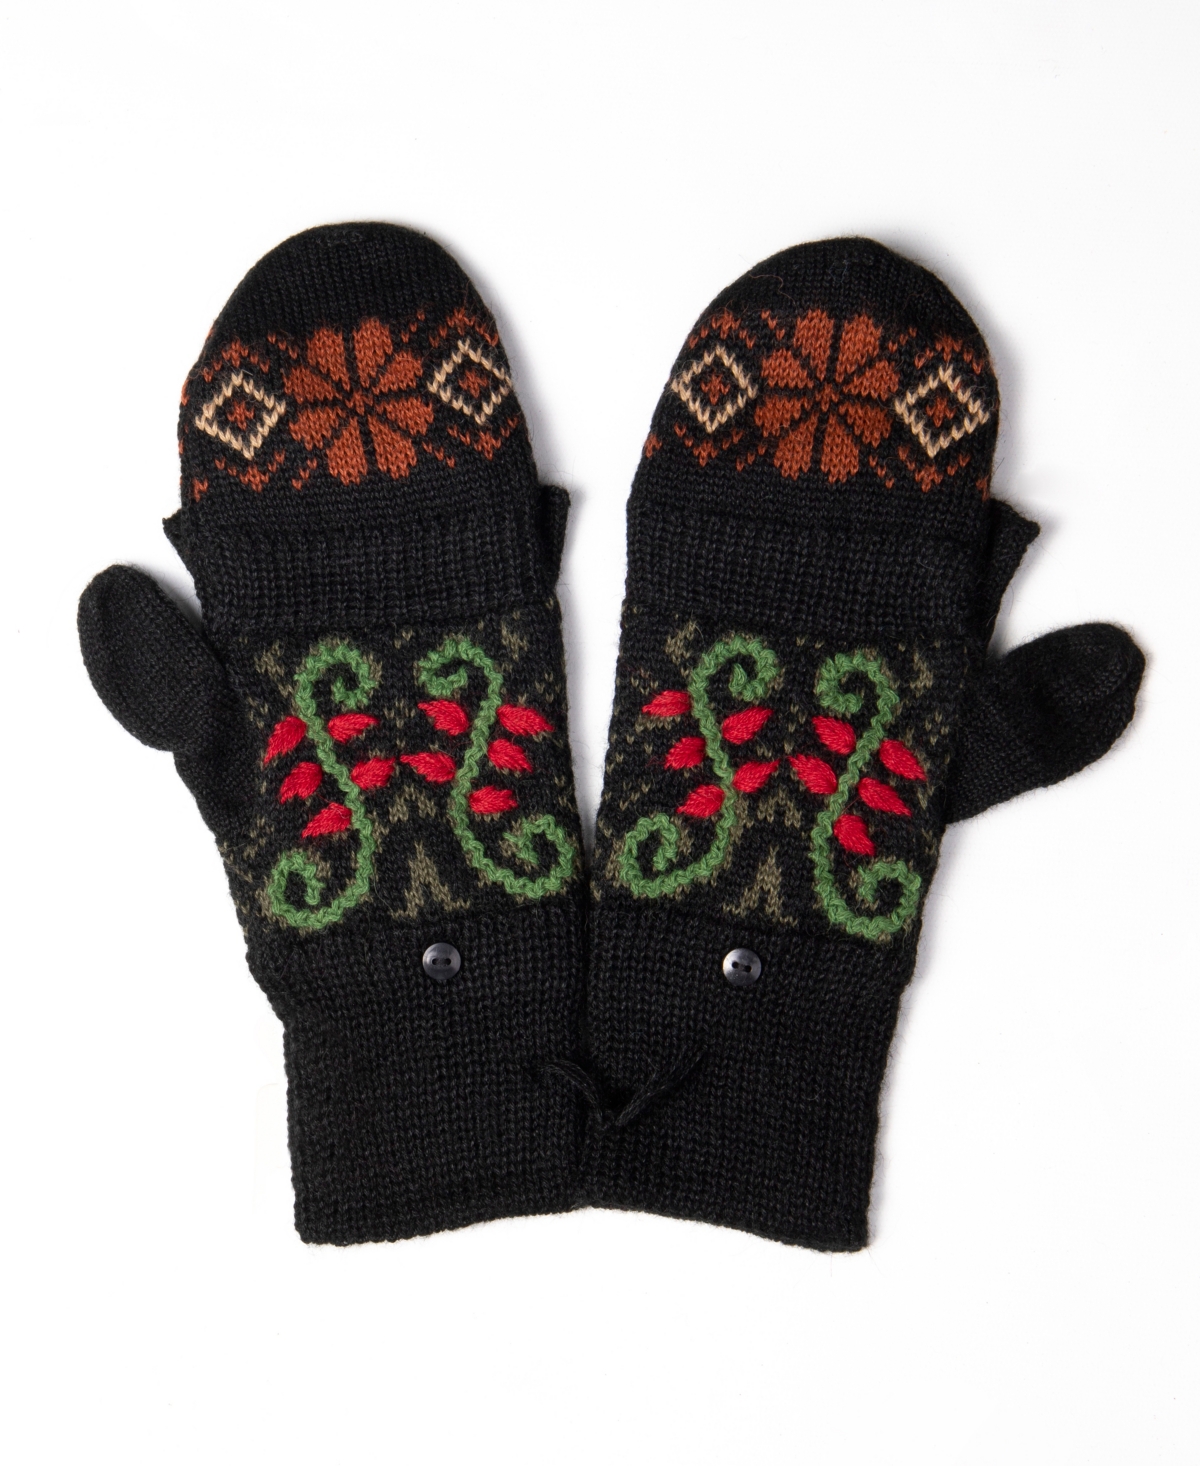 Simply Natural Women's Glittens Gloves In Black,green